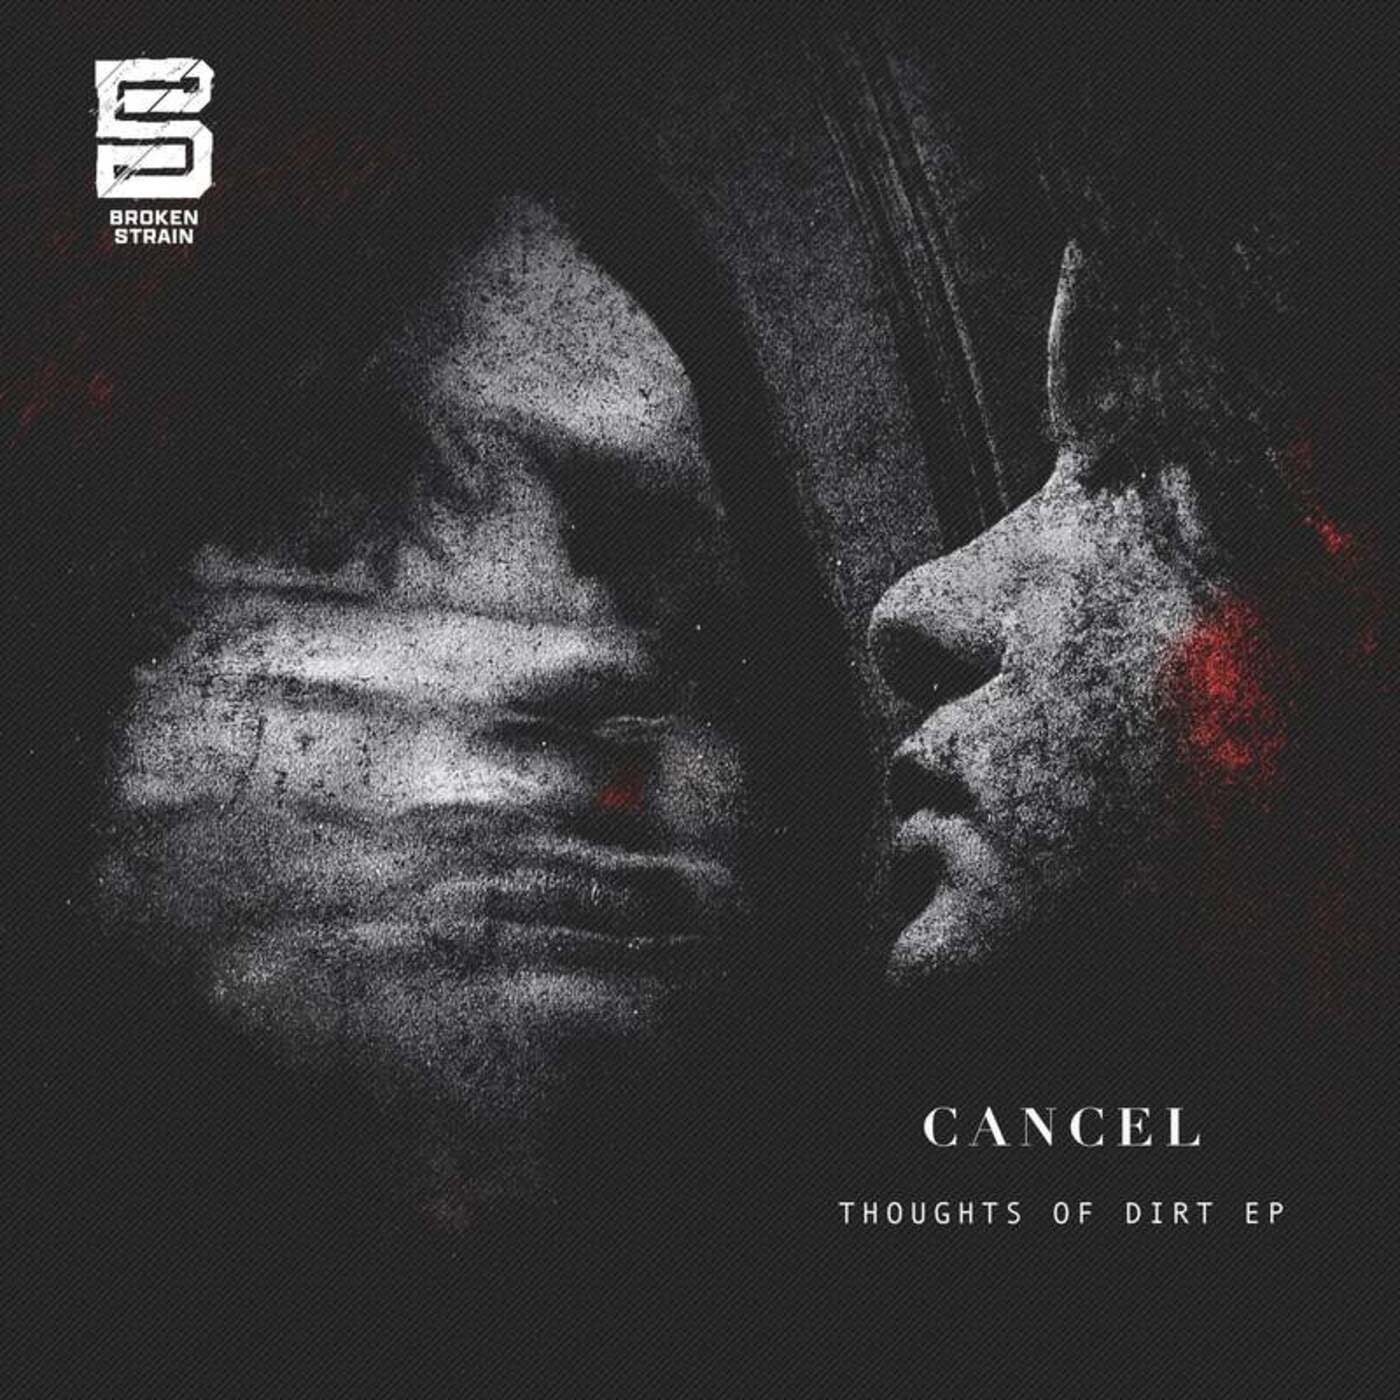 CANCEL, AVLM – Thoughts of Dirt EP [BSR010]